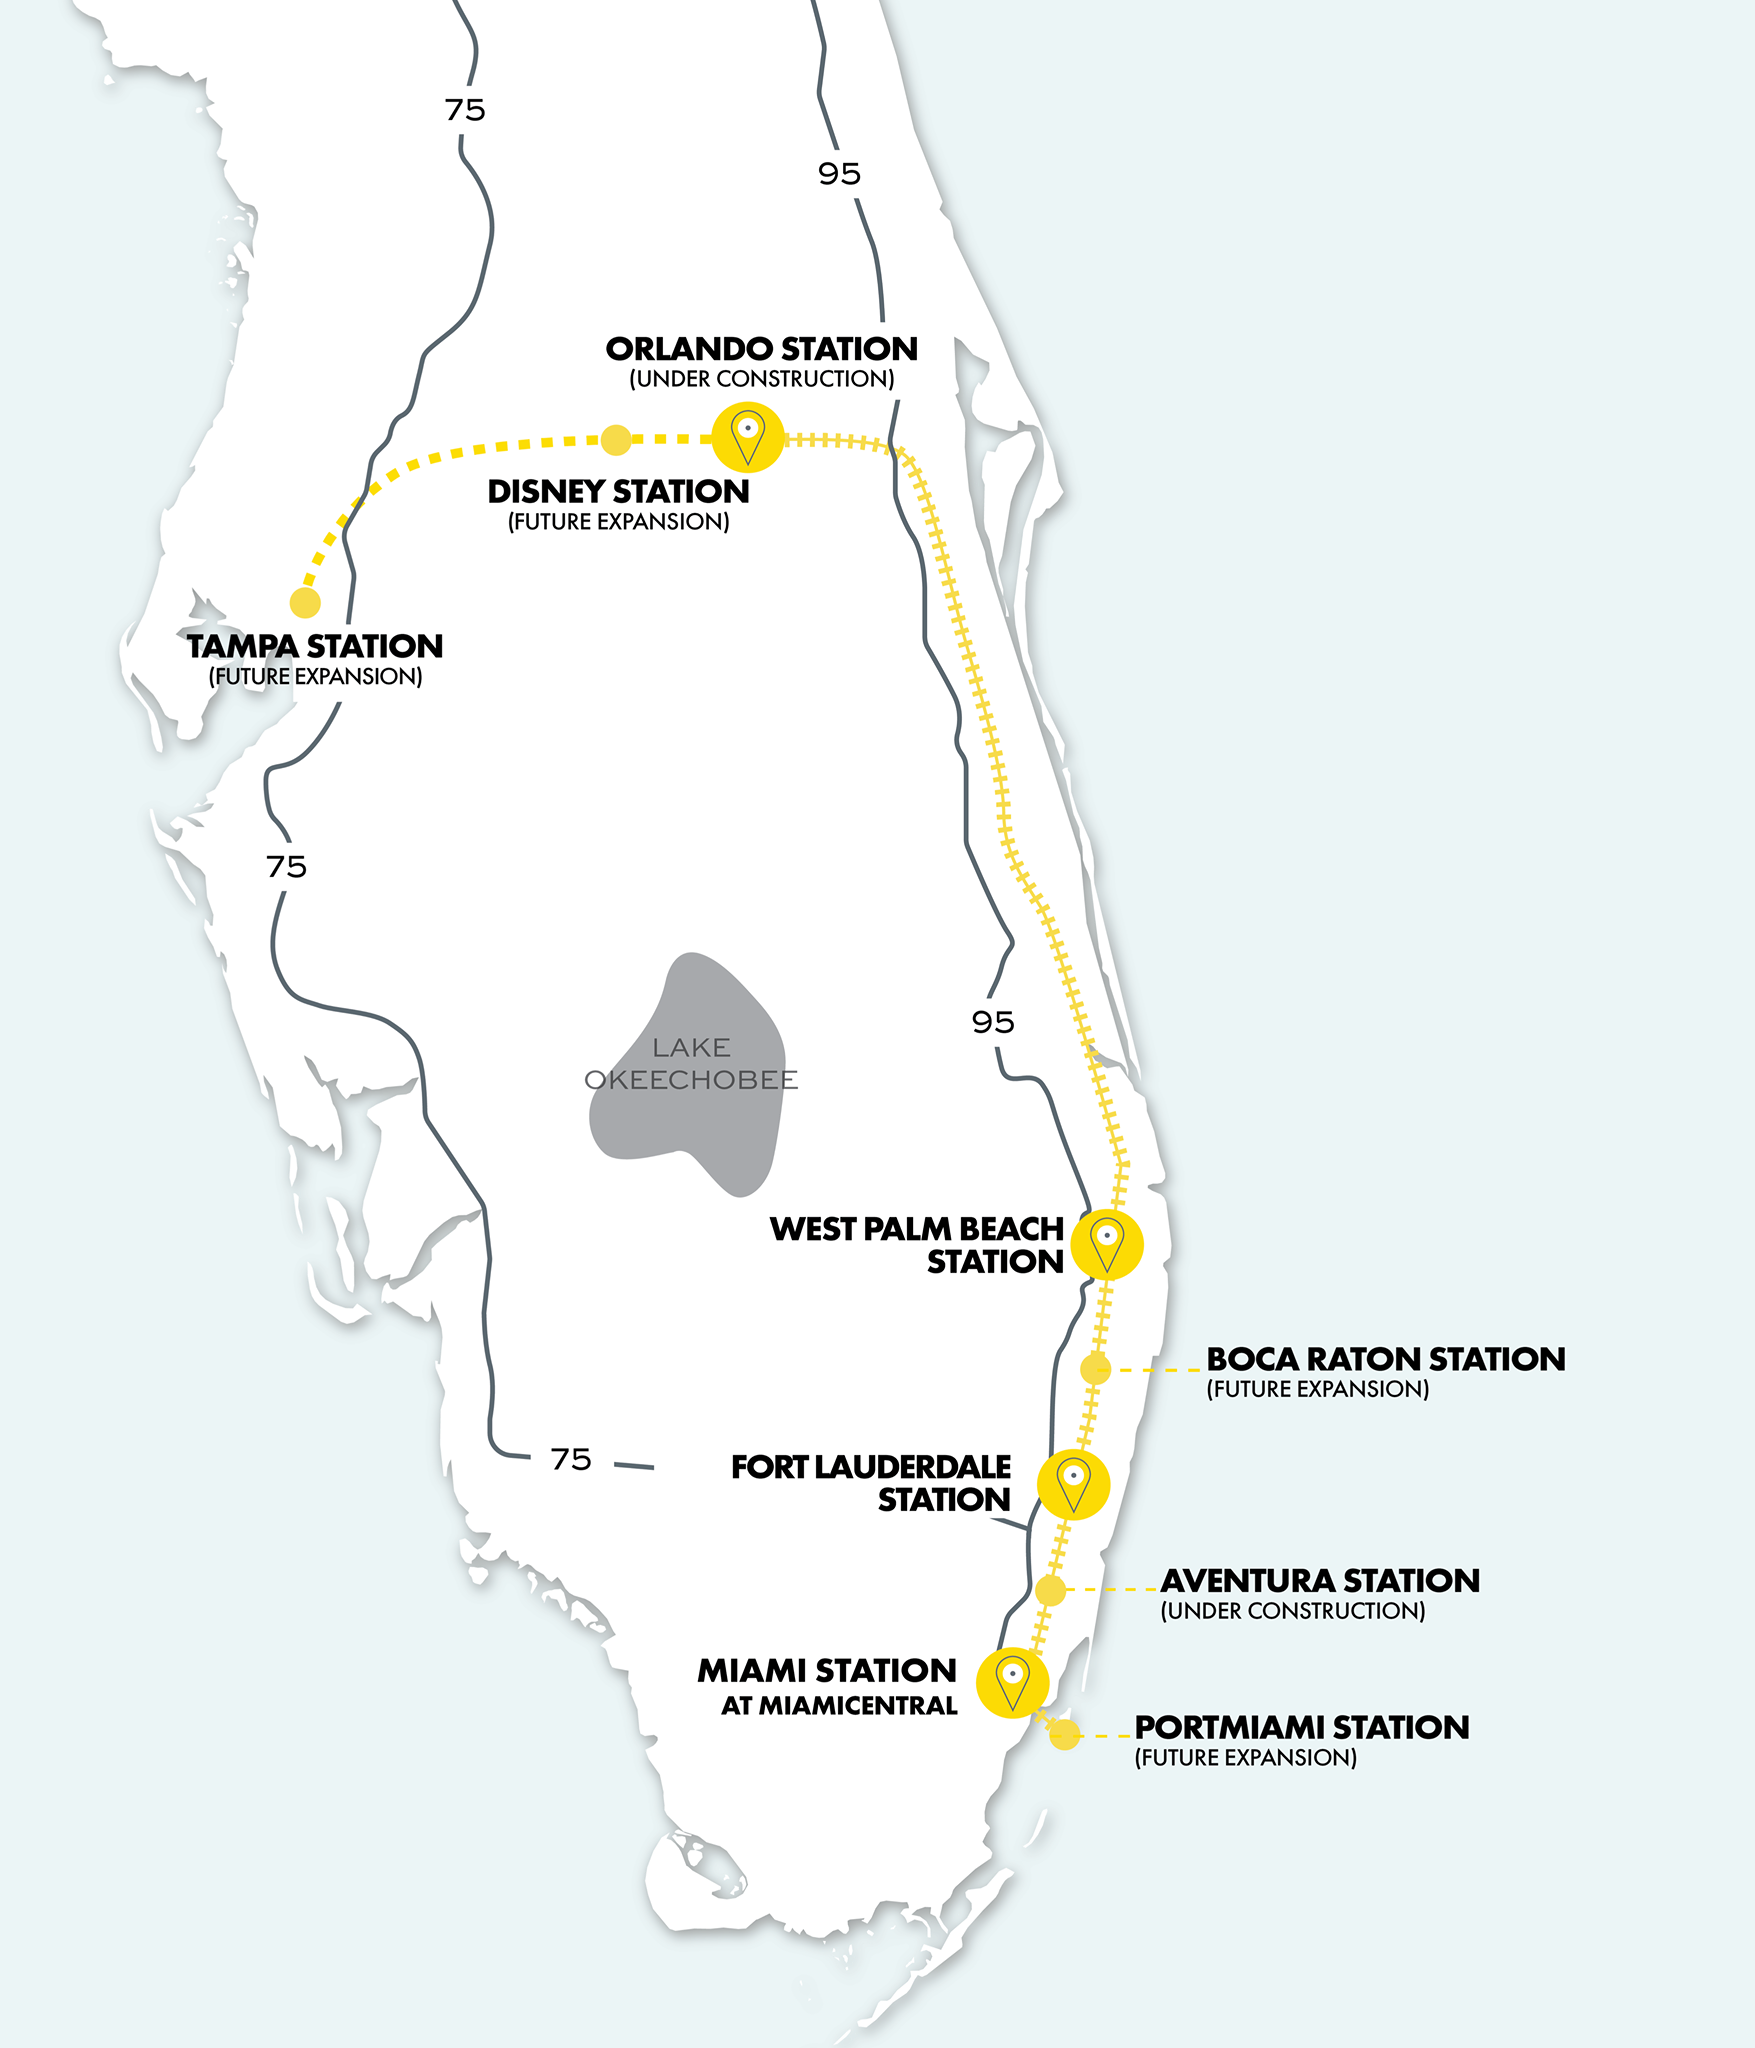 How Much Will It Cost to Take the Brightline Train to Disney?